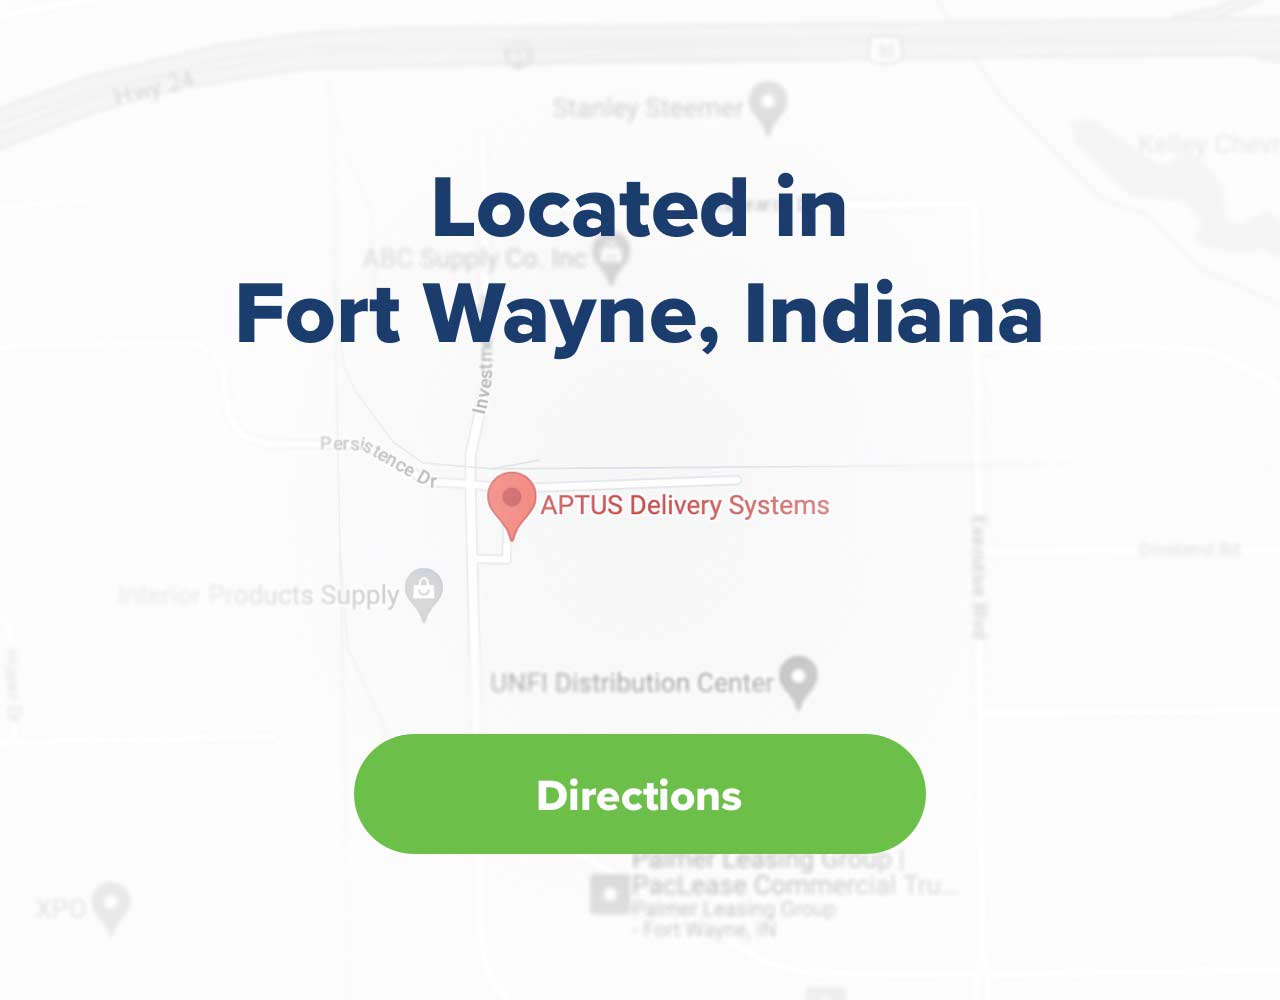 A map view of Fort Wayne Indiana, with a map point locating Aptus.